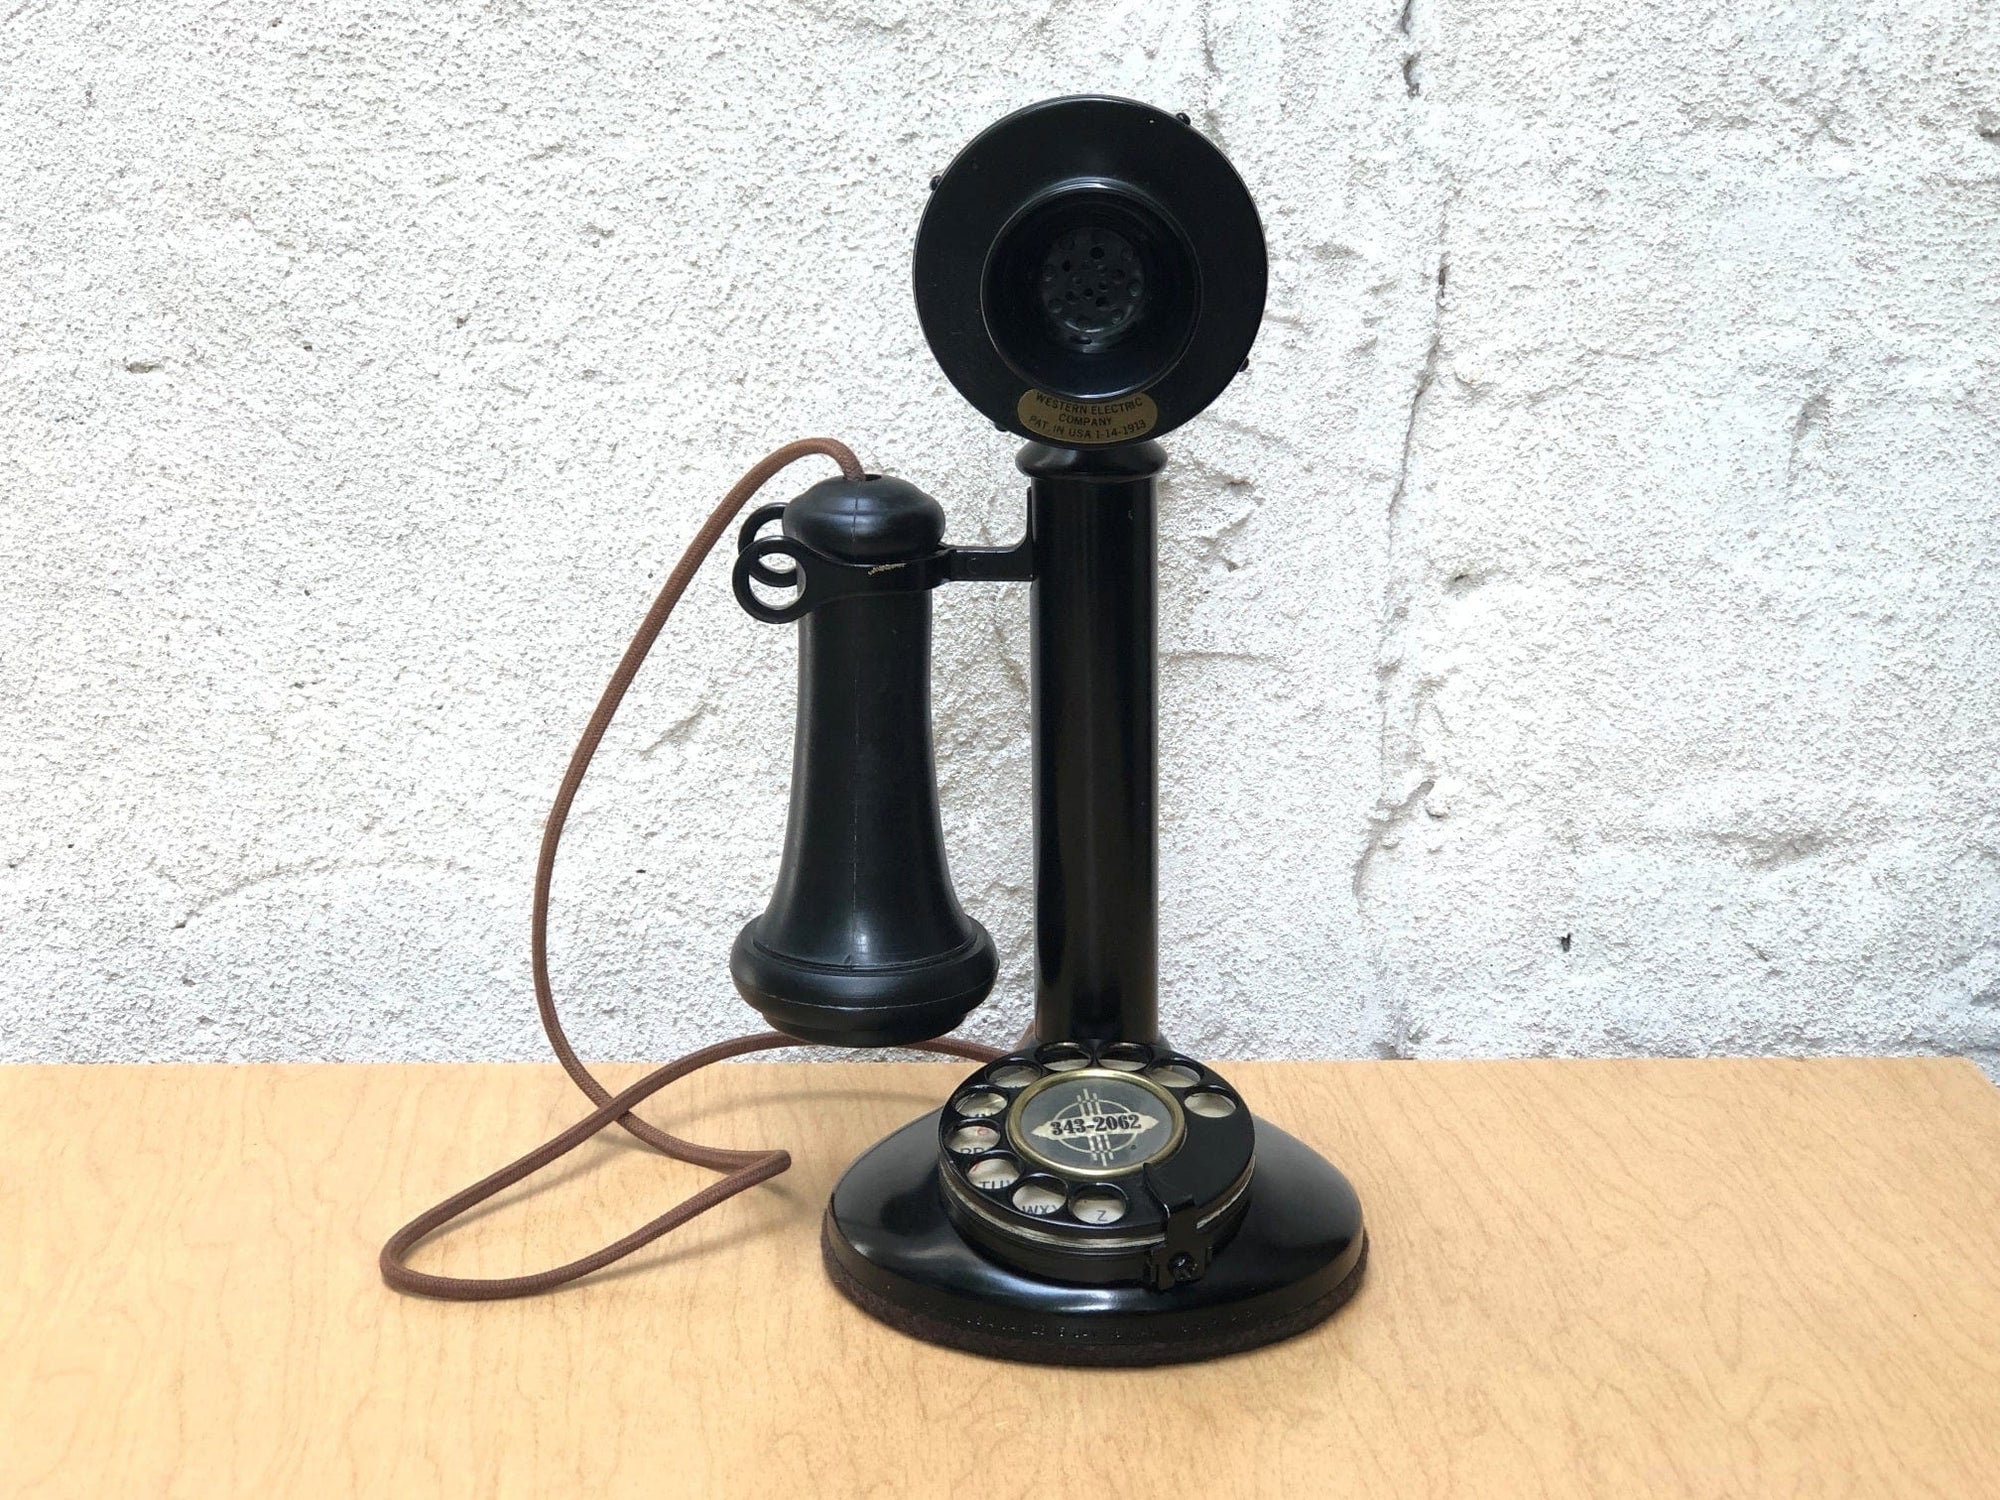 I Like Mike's Mid Century Modern Accessories Western Electric Black Candlestick Telephone circa 1913, Professionally Refurbished